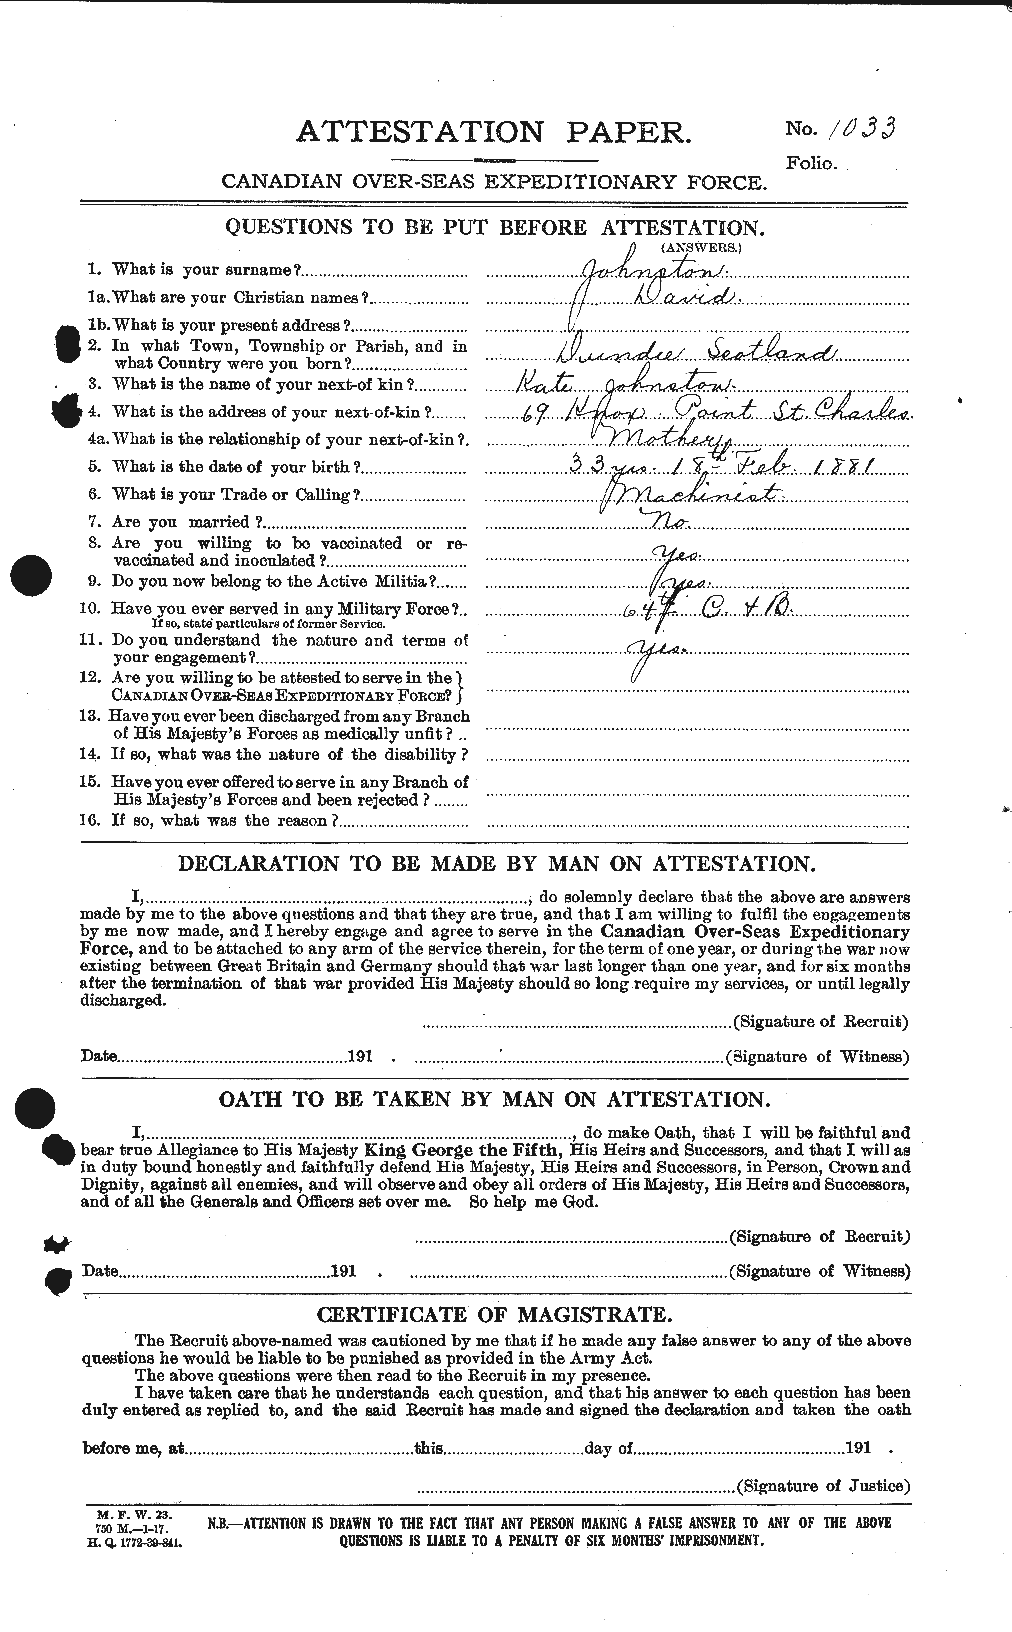 Personnel Records of the First World War - CEF 423155a